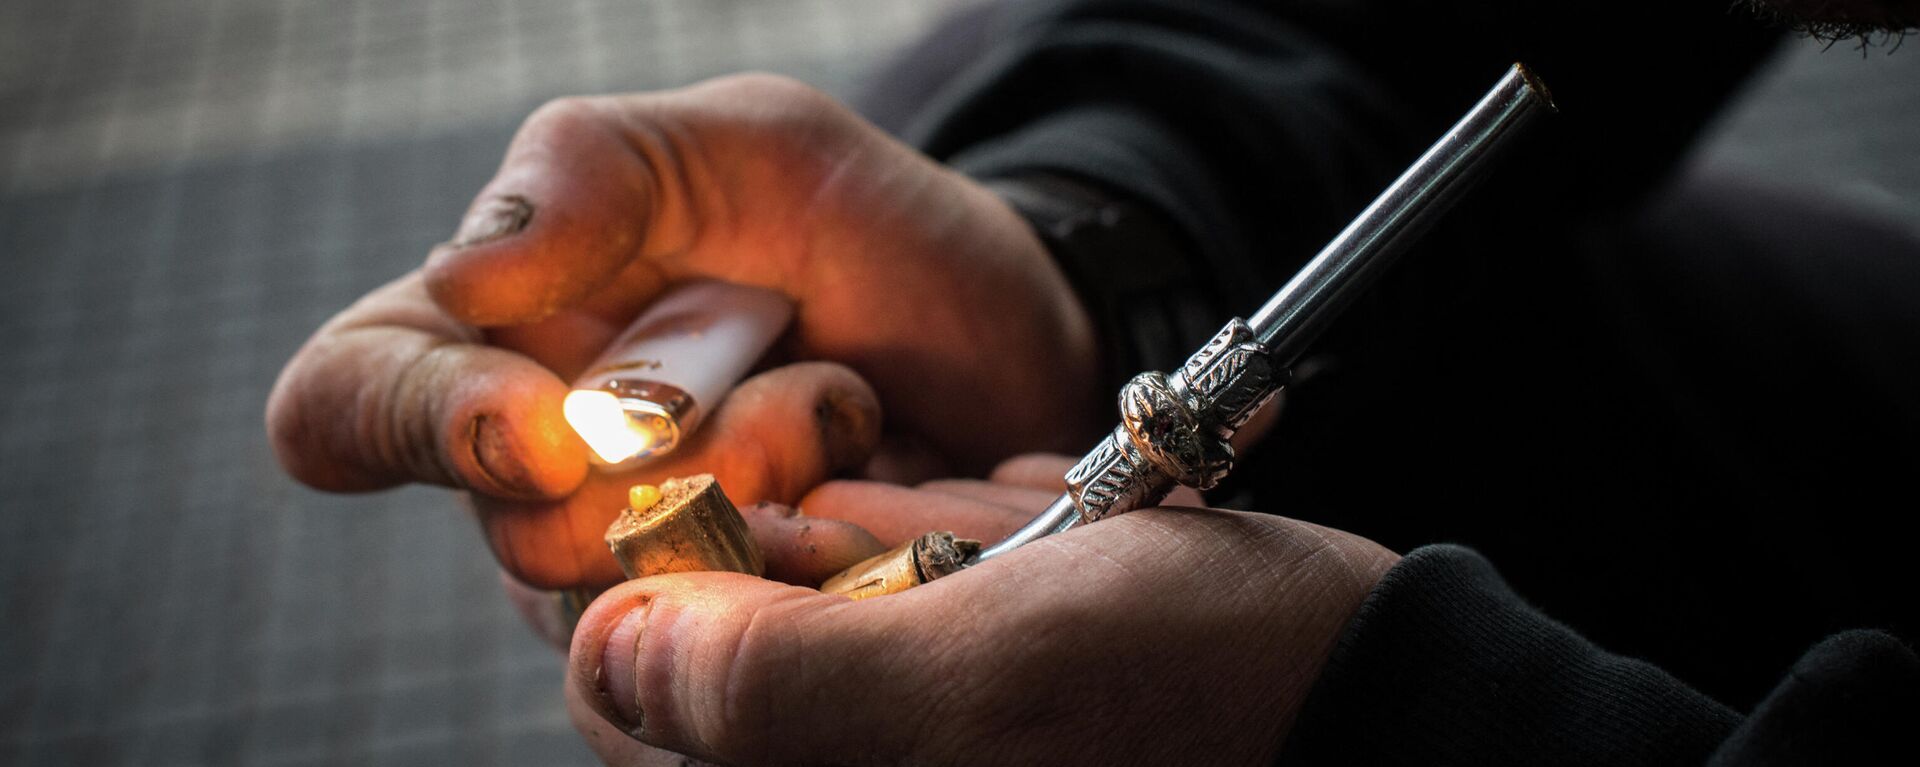 A drug addict lights an improvised pipe in Crackolandia, a place where drug addicts gather to smoke crack, in downtown Sao Paulo Brazil on January 11, 2013 - Sputnik International, 1920, 15.02.2022